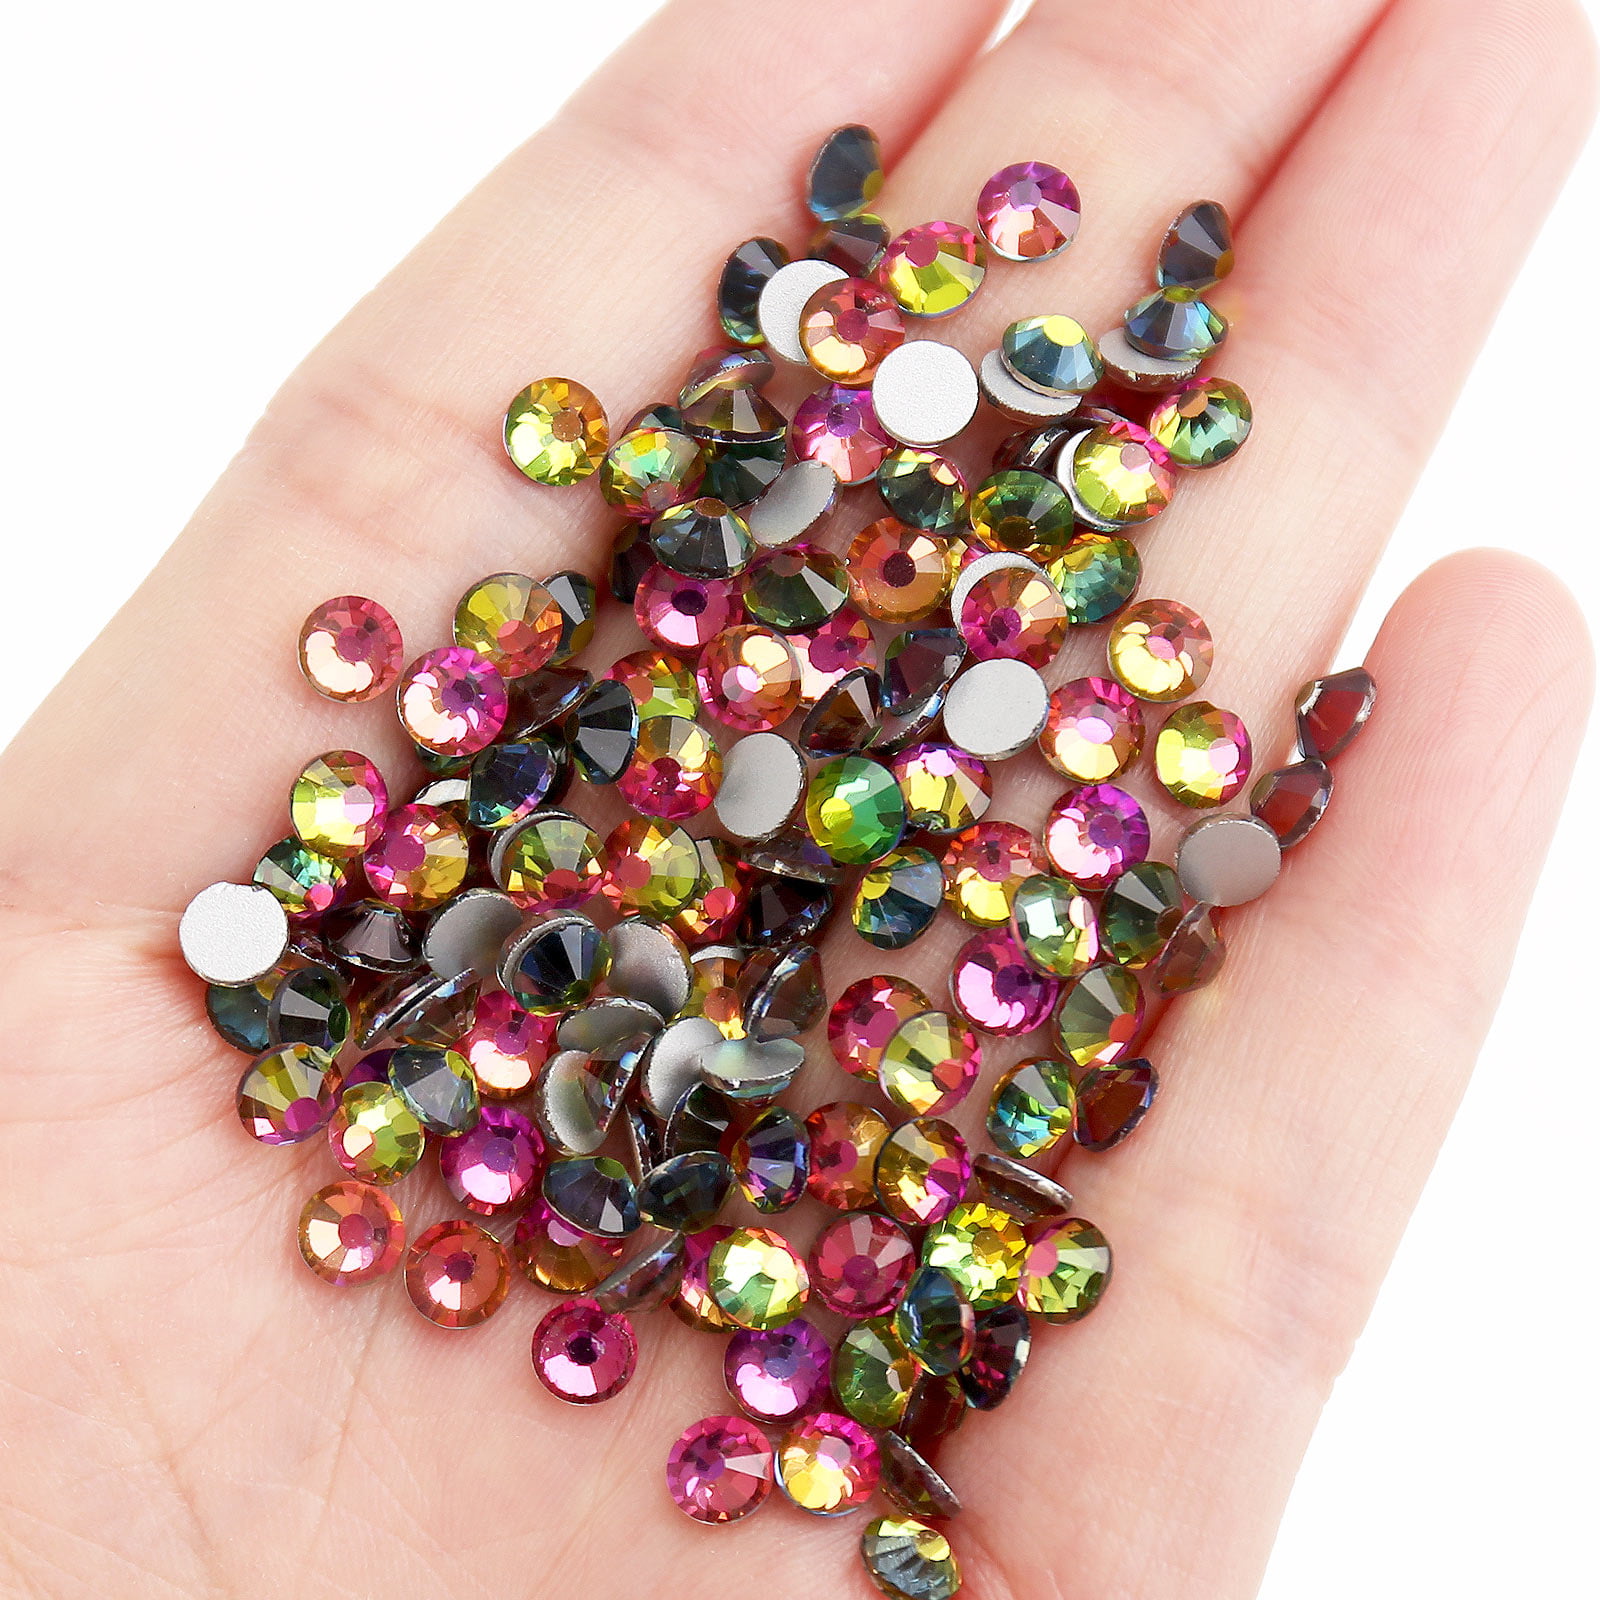 3456 Pcs Crystals Diamond Rhinestones AB Clear Flat Back Round Gems  Flatback Glass Crystals Mixed Size Crystals Gems for Crafts Nail Clothes  Shoes